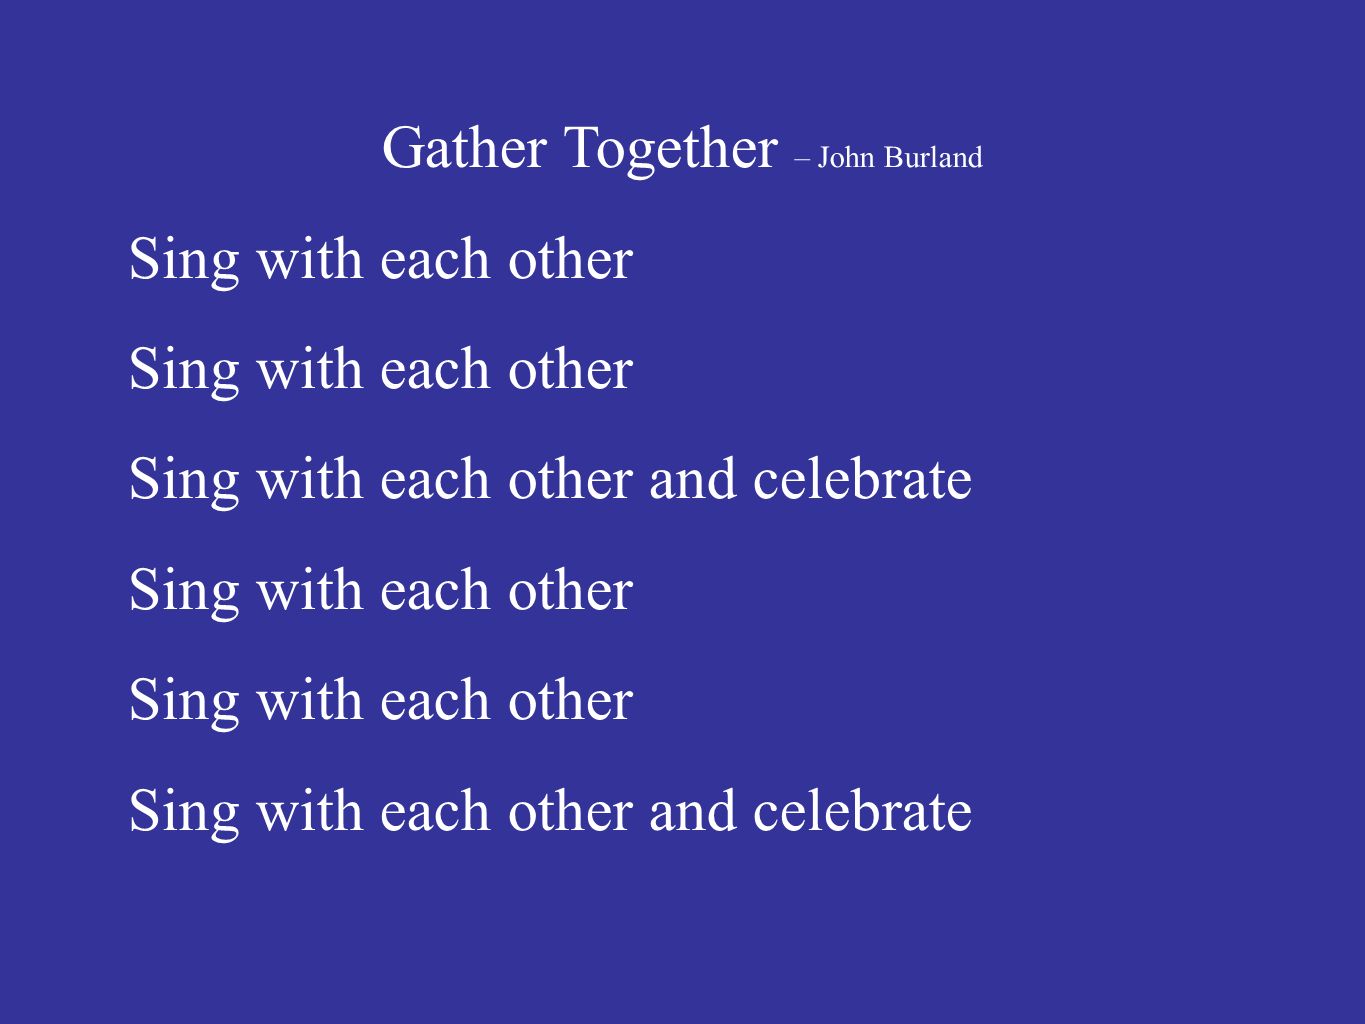 Gather Together – John Burland Sing with each other Sing with each other and celebrate Sing with each other Sing with each other and celebrate